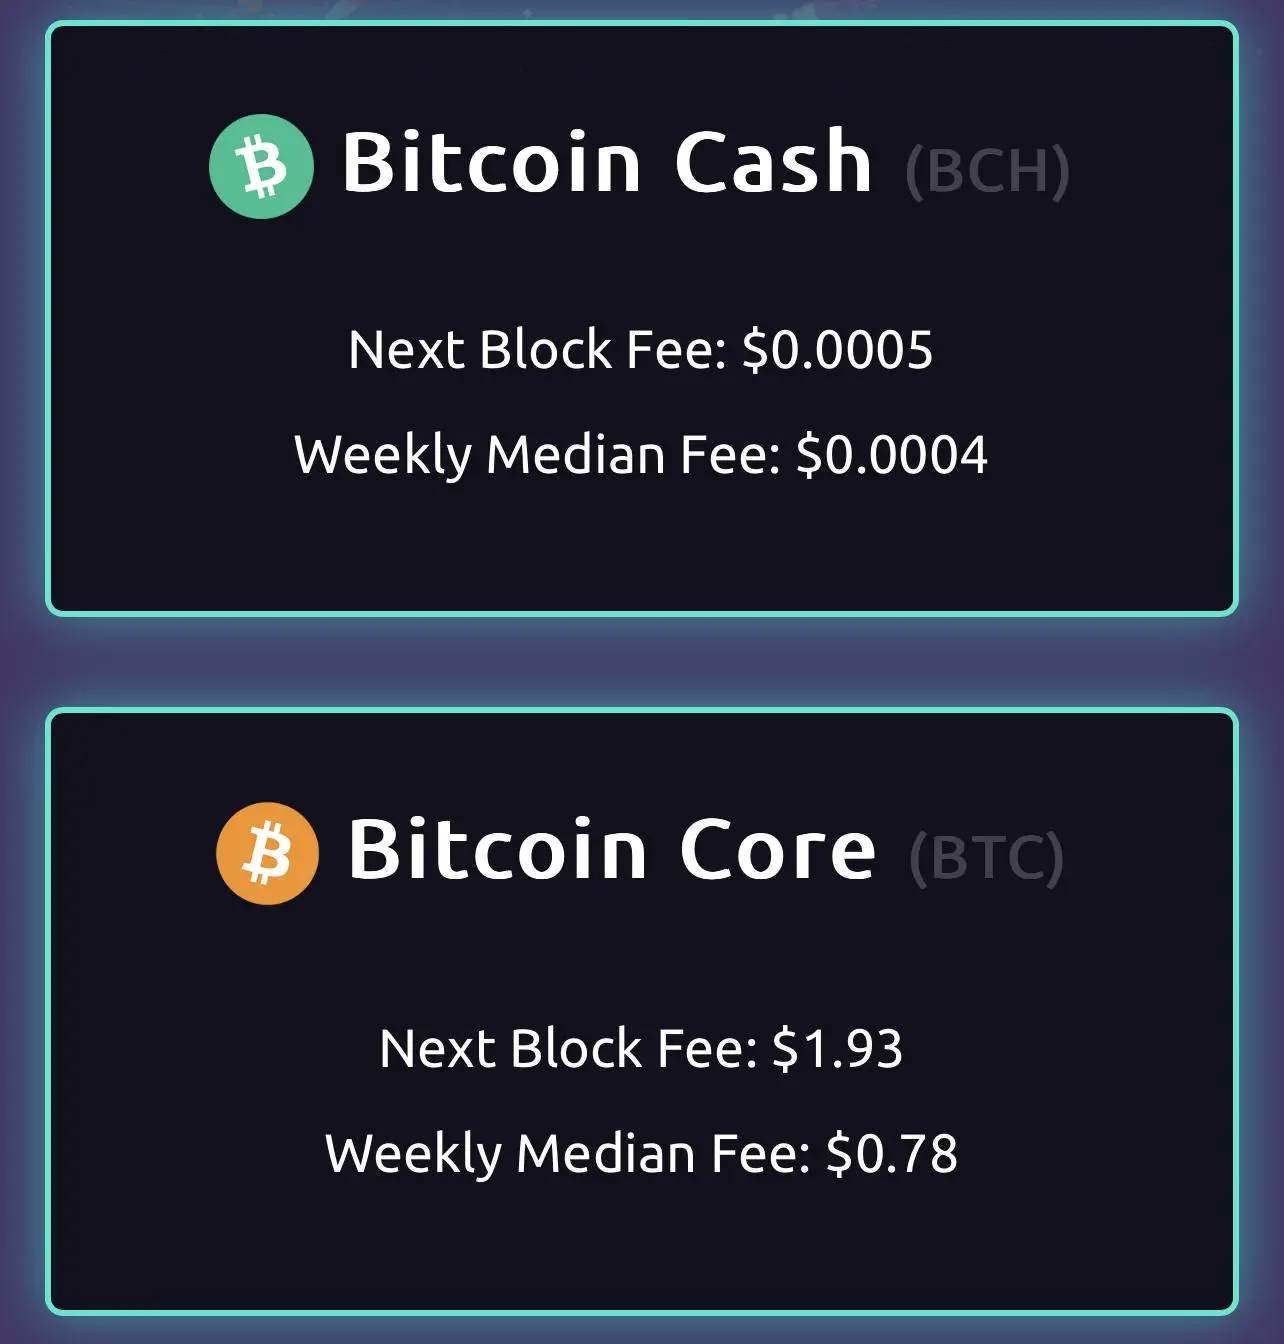 bch and btc fees comparison